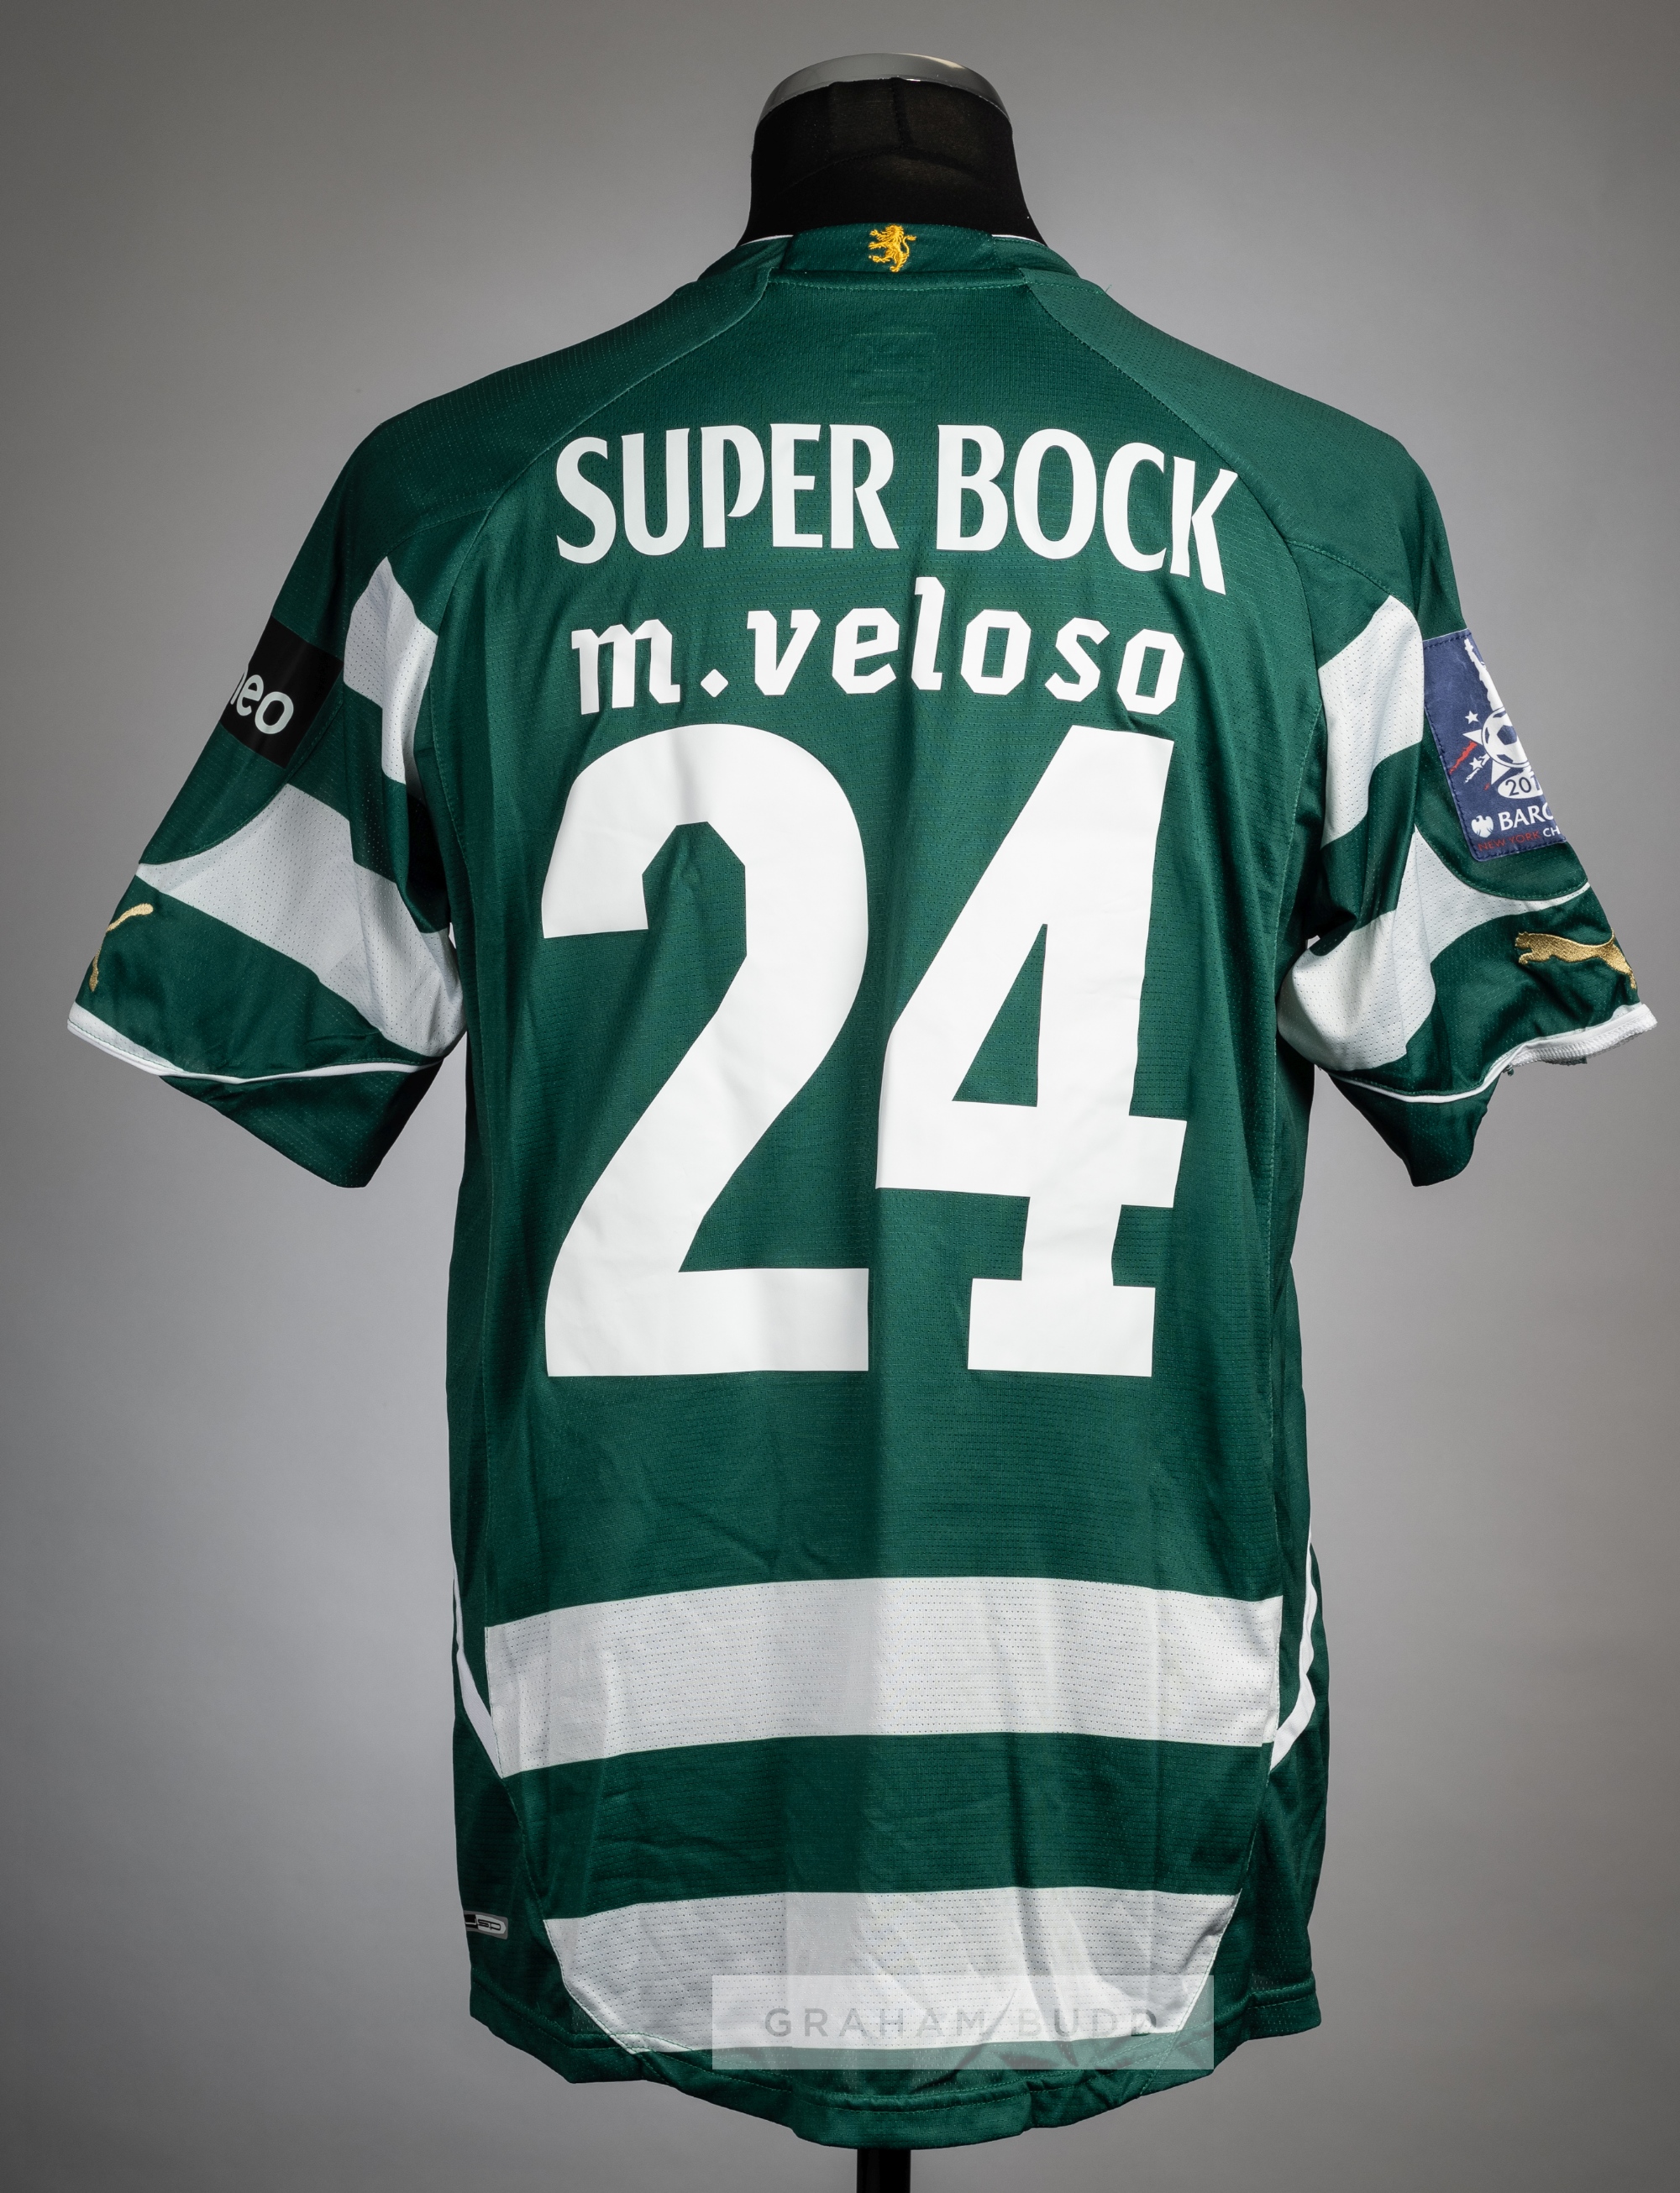 Miguel Veloso green and white hooped Sporting CP no.24 jersey v Tottenham Hotspur in the Barclays - Image 2 of 2